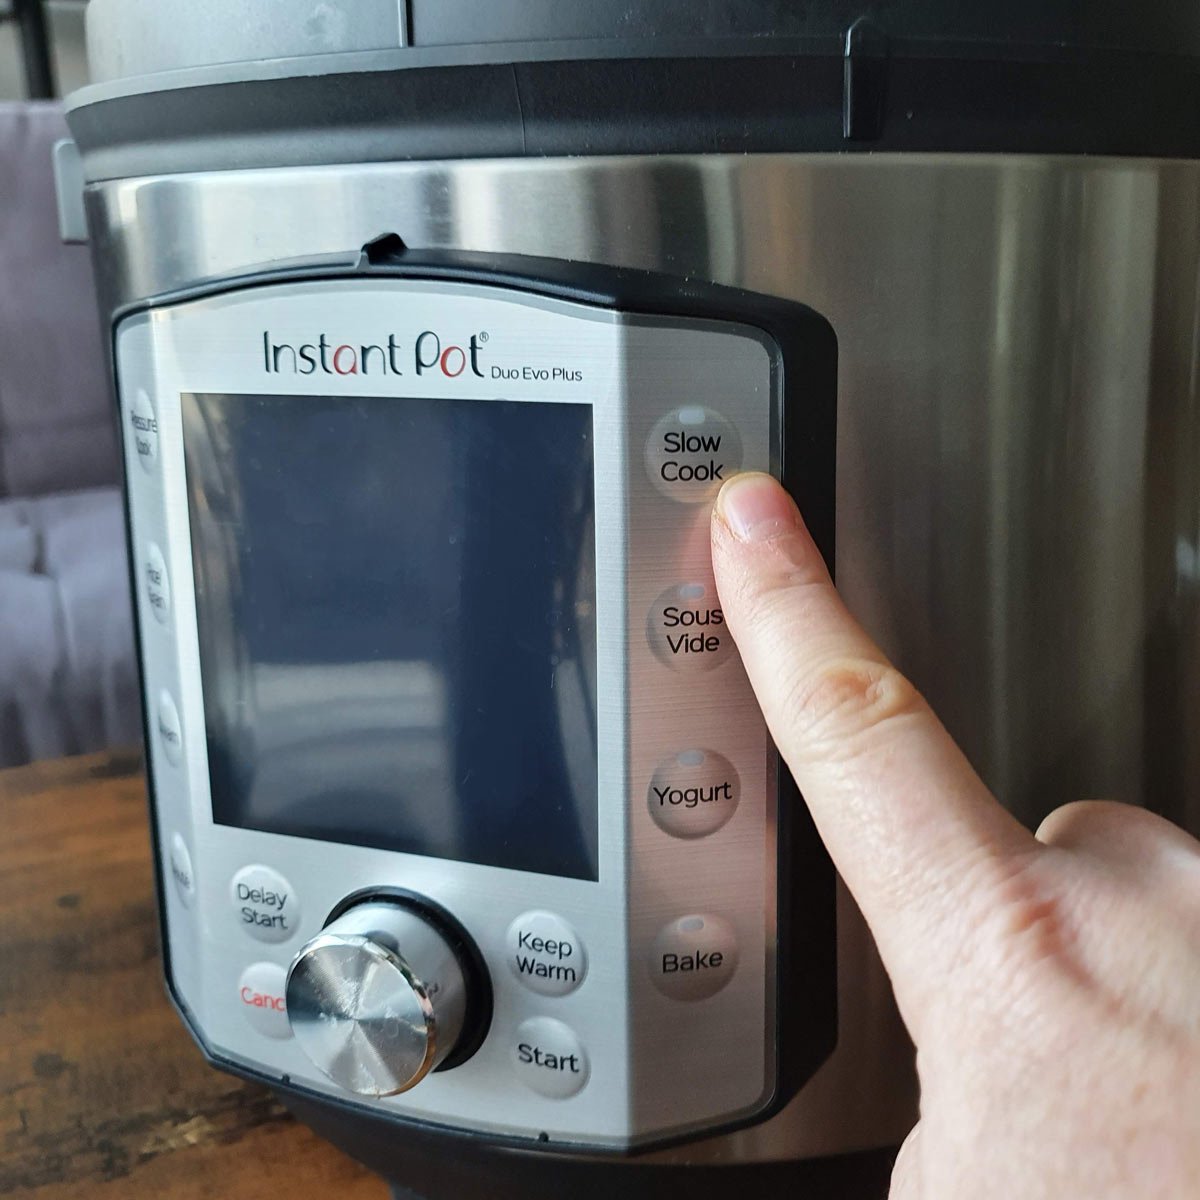 How To Use the Instant Pot as a Slow Cooker